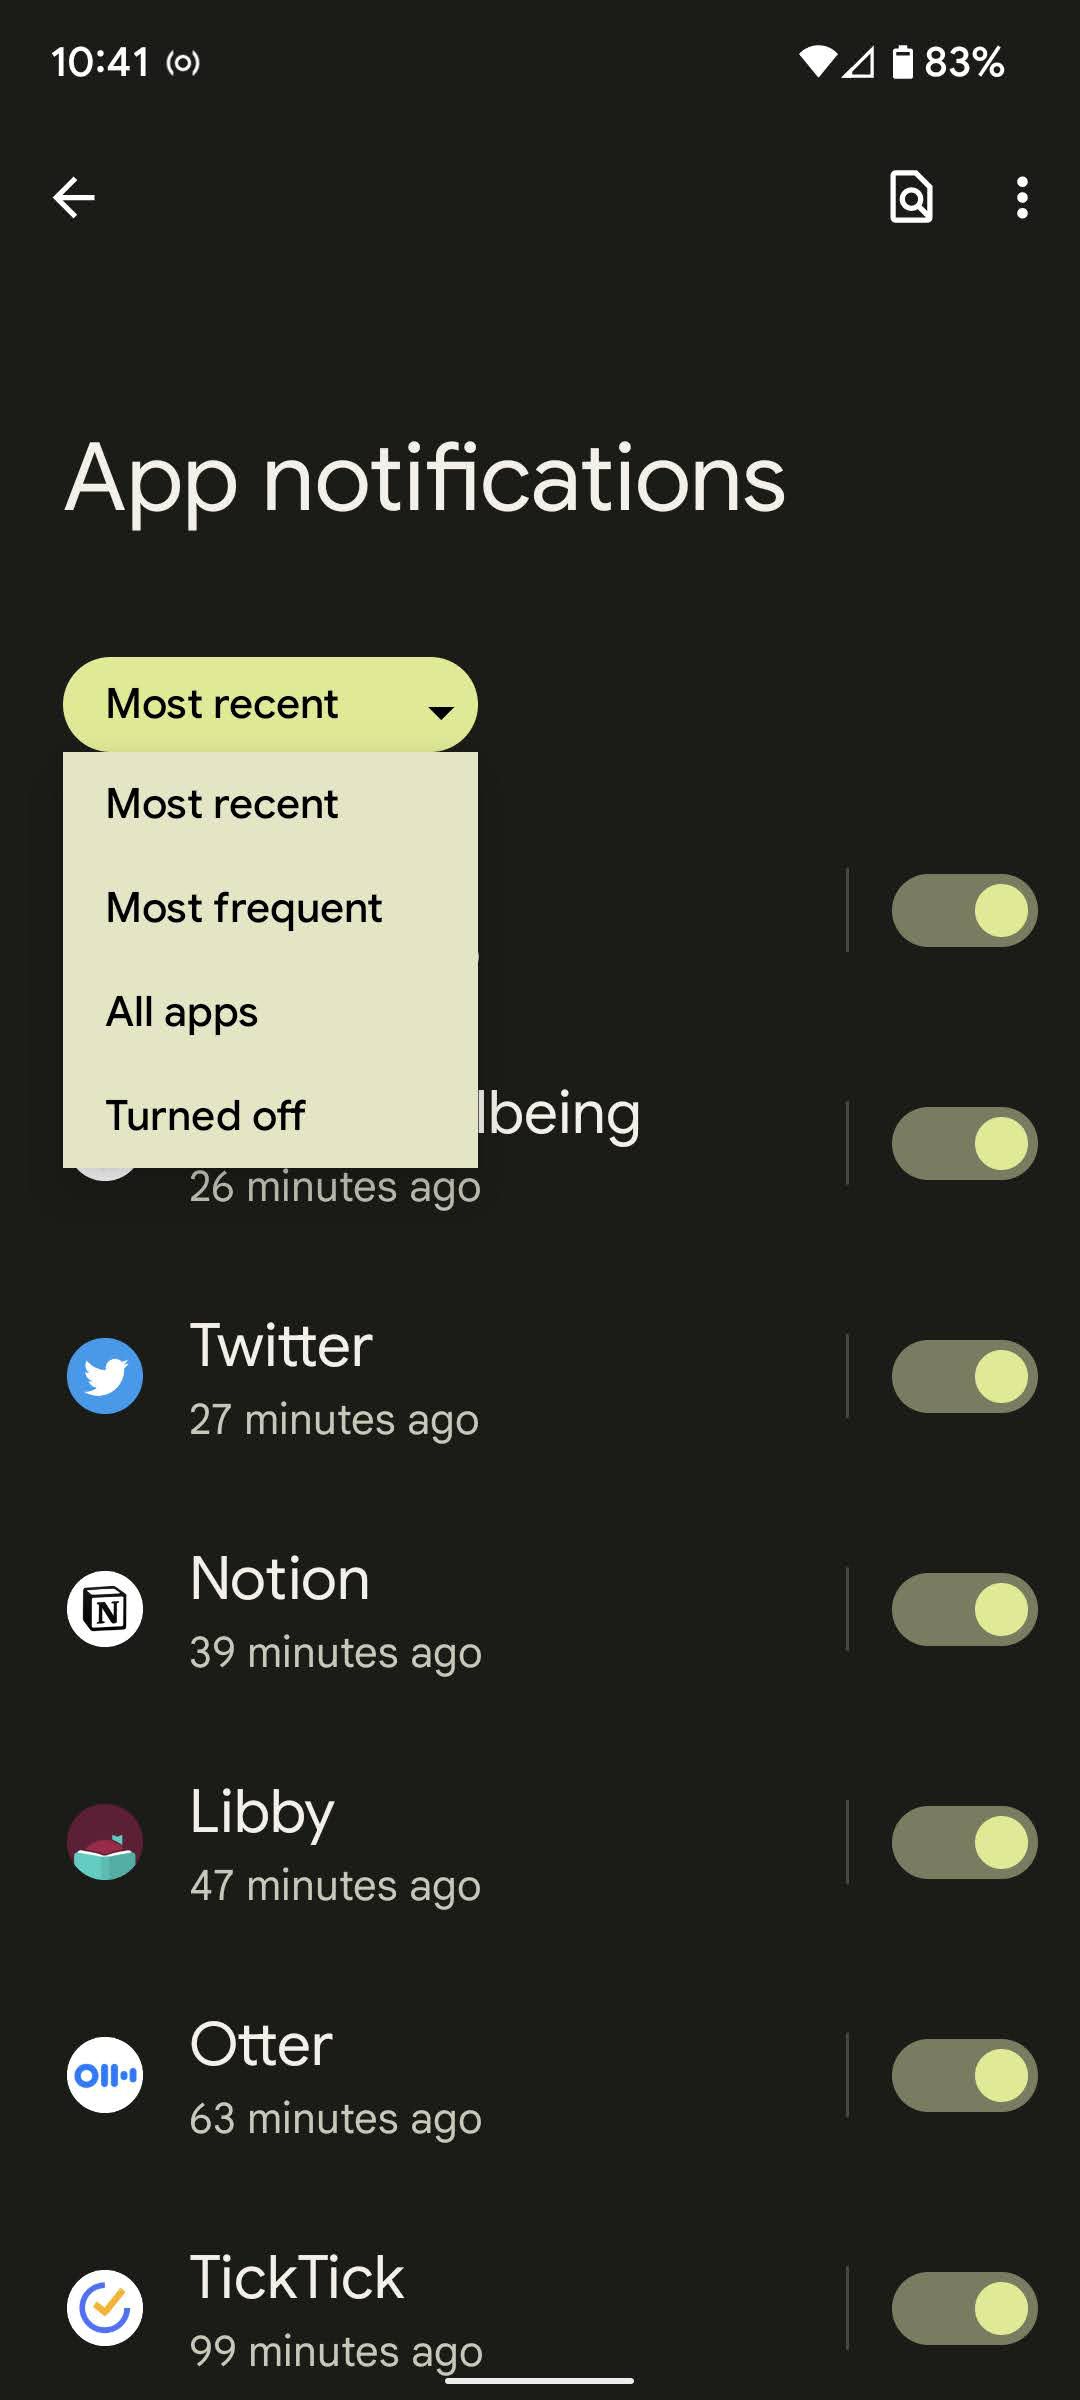 You can sort the apps that send notifications in various ways.